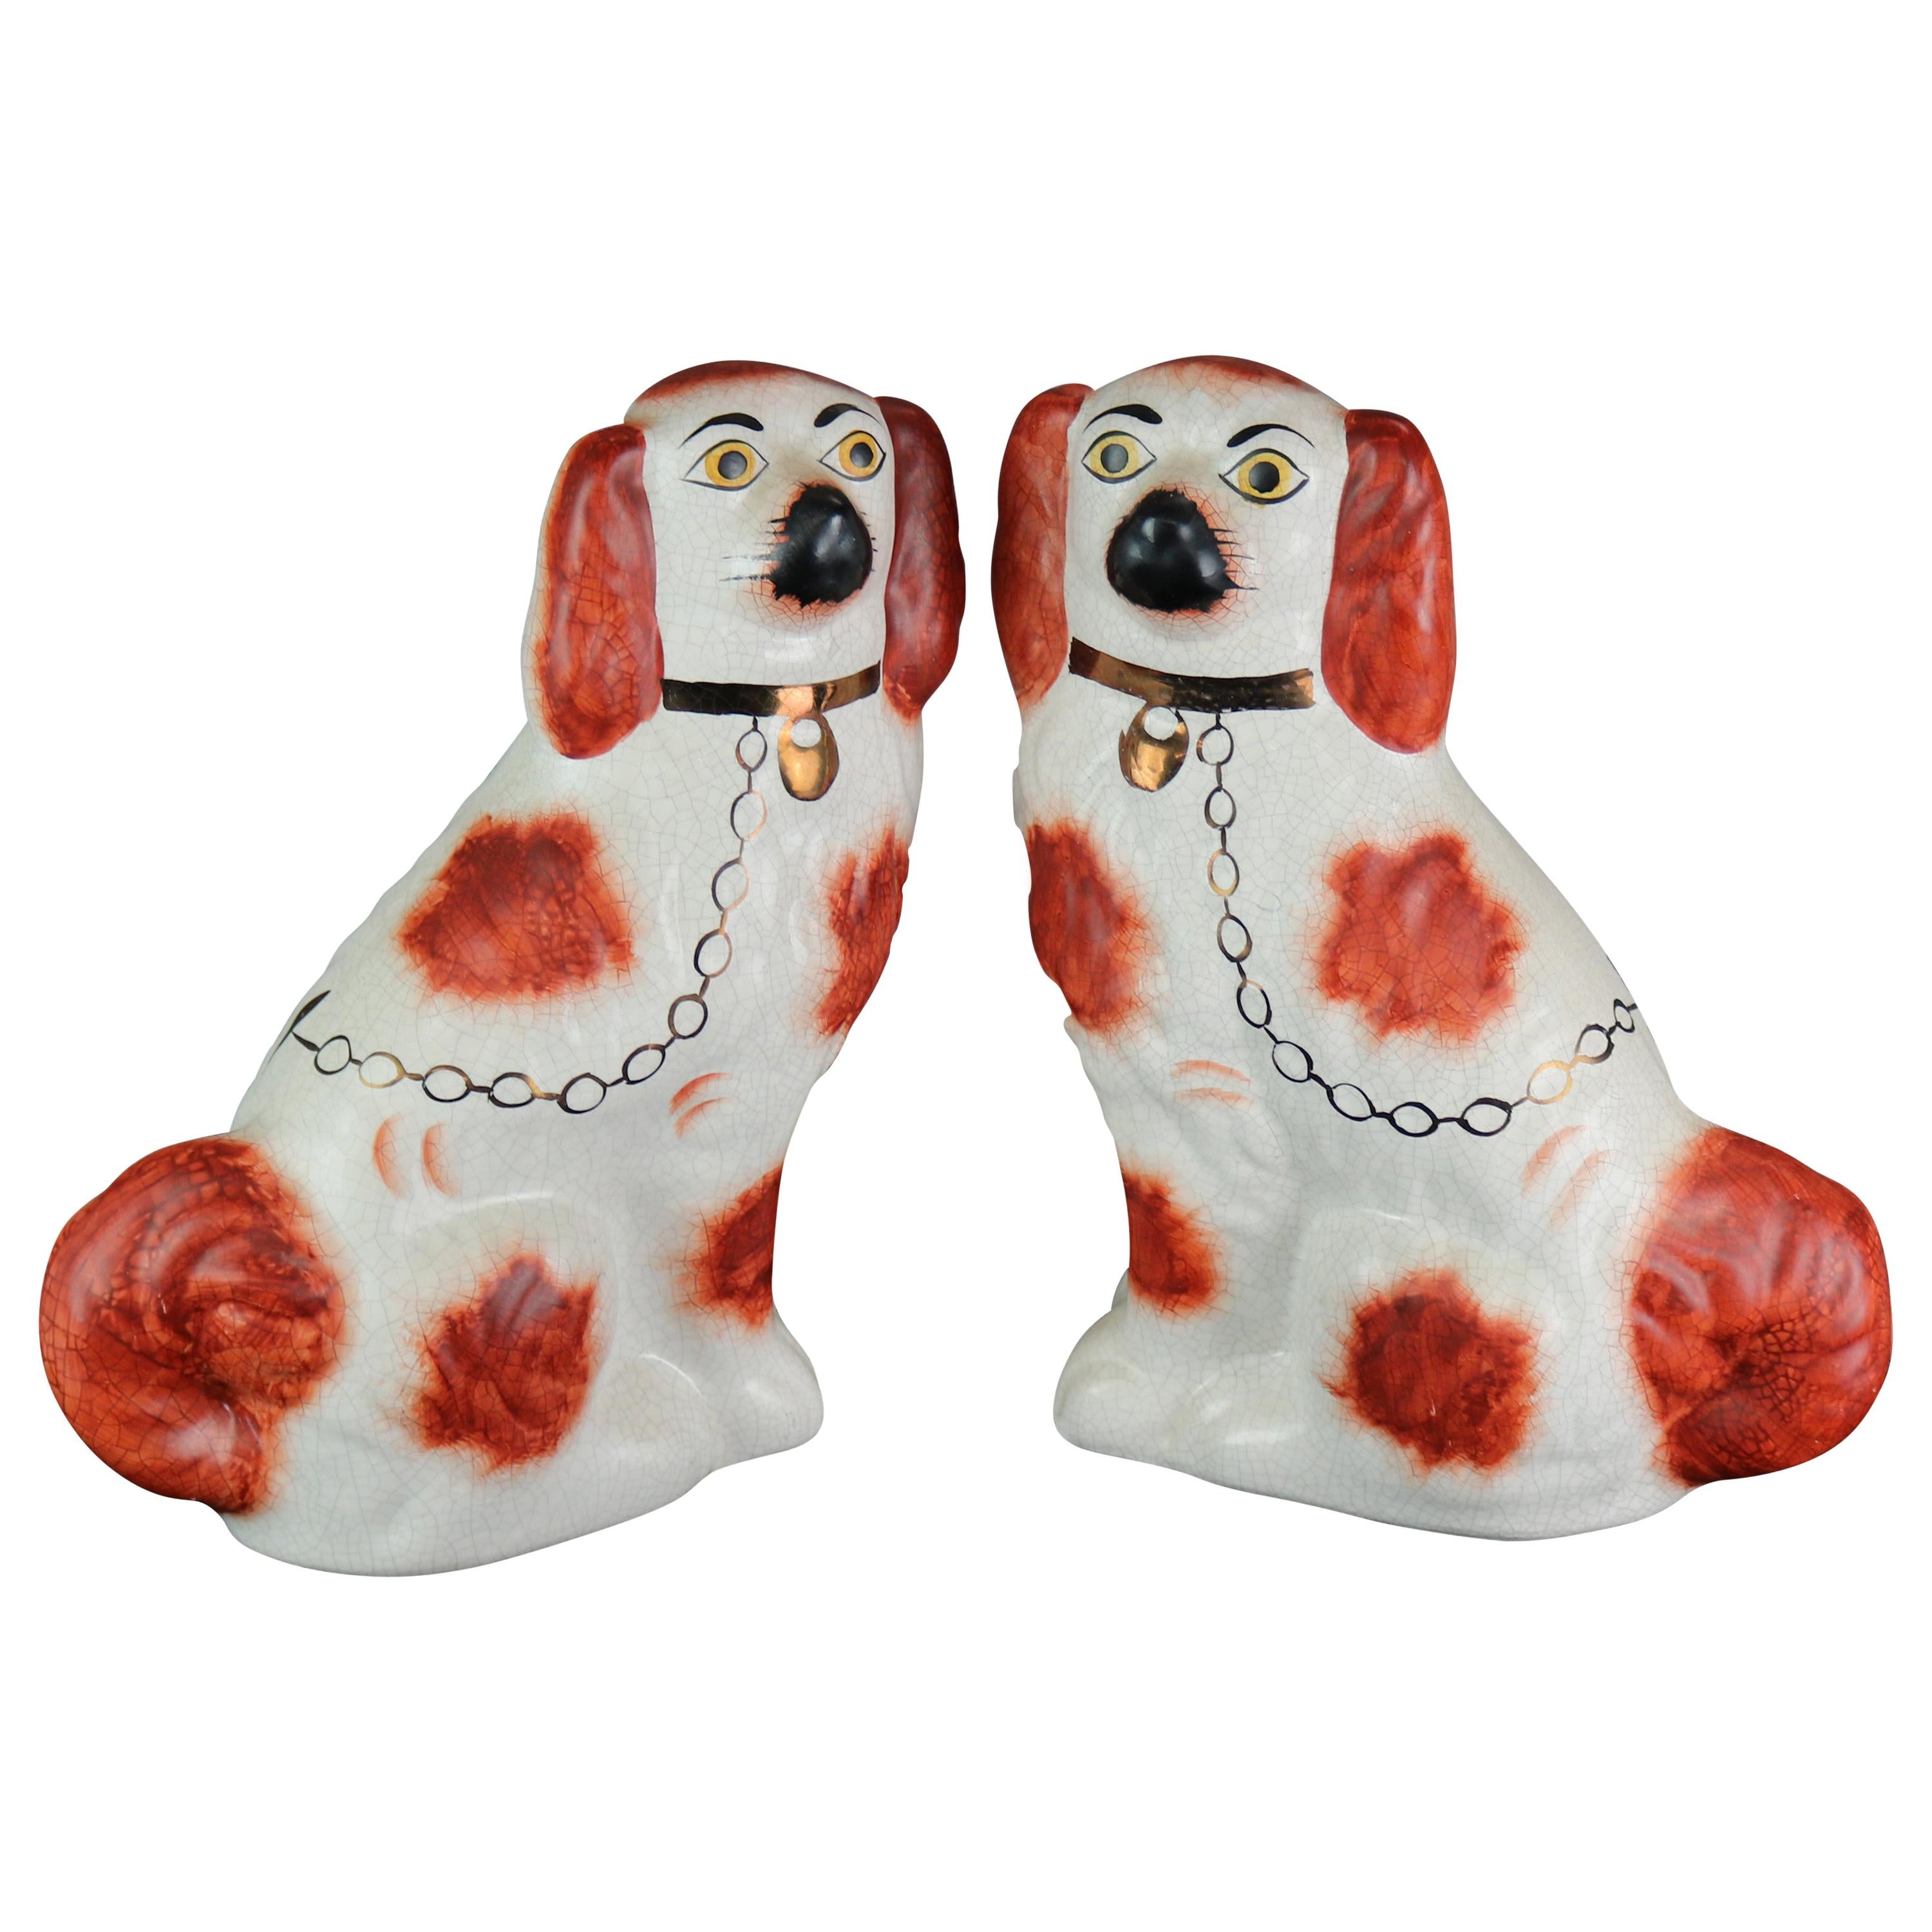 Antique Pair of Large English Staffordshire Pottery Dogs, Spaniels, circa 1900